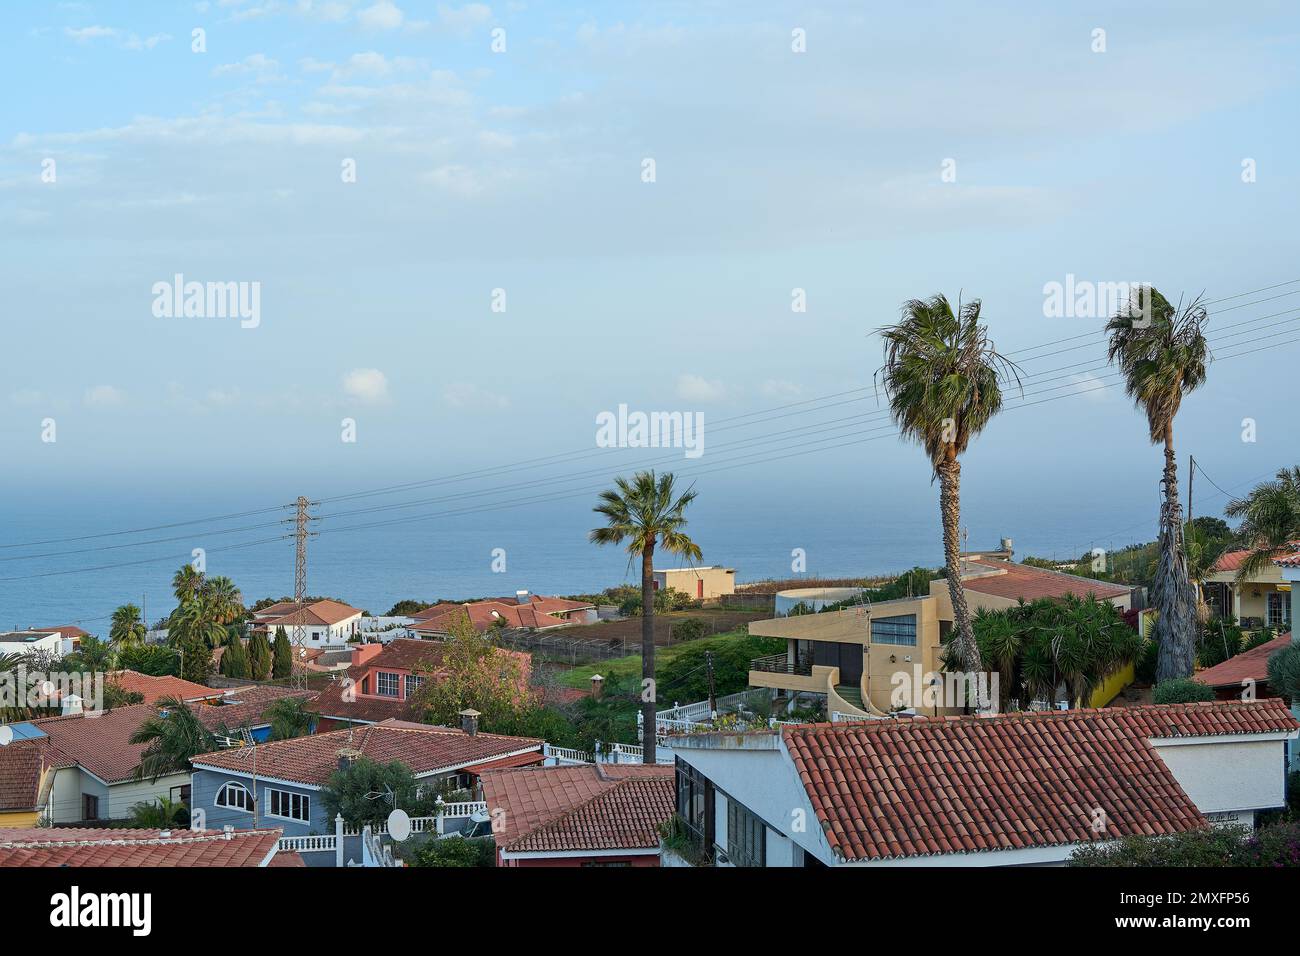 Views of the Atlantic sea from a holiday apartment in one of the municipalities of Tacoronte in Tenerife which is one of the Canary Islands of Spain Stock Photo